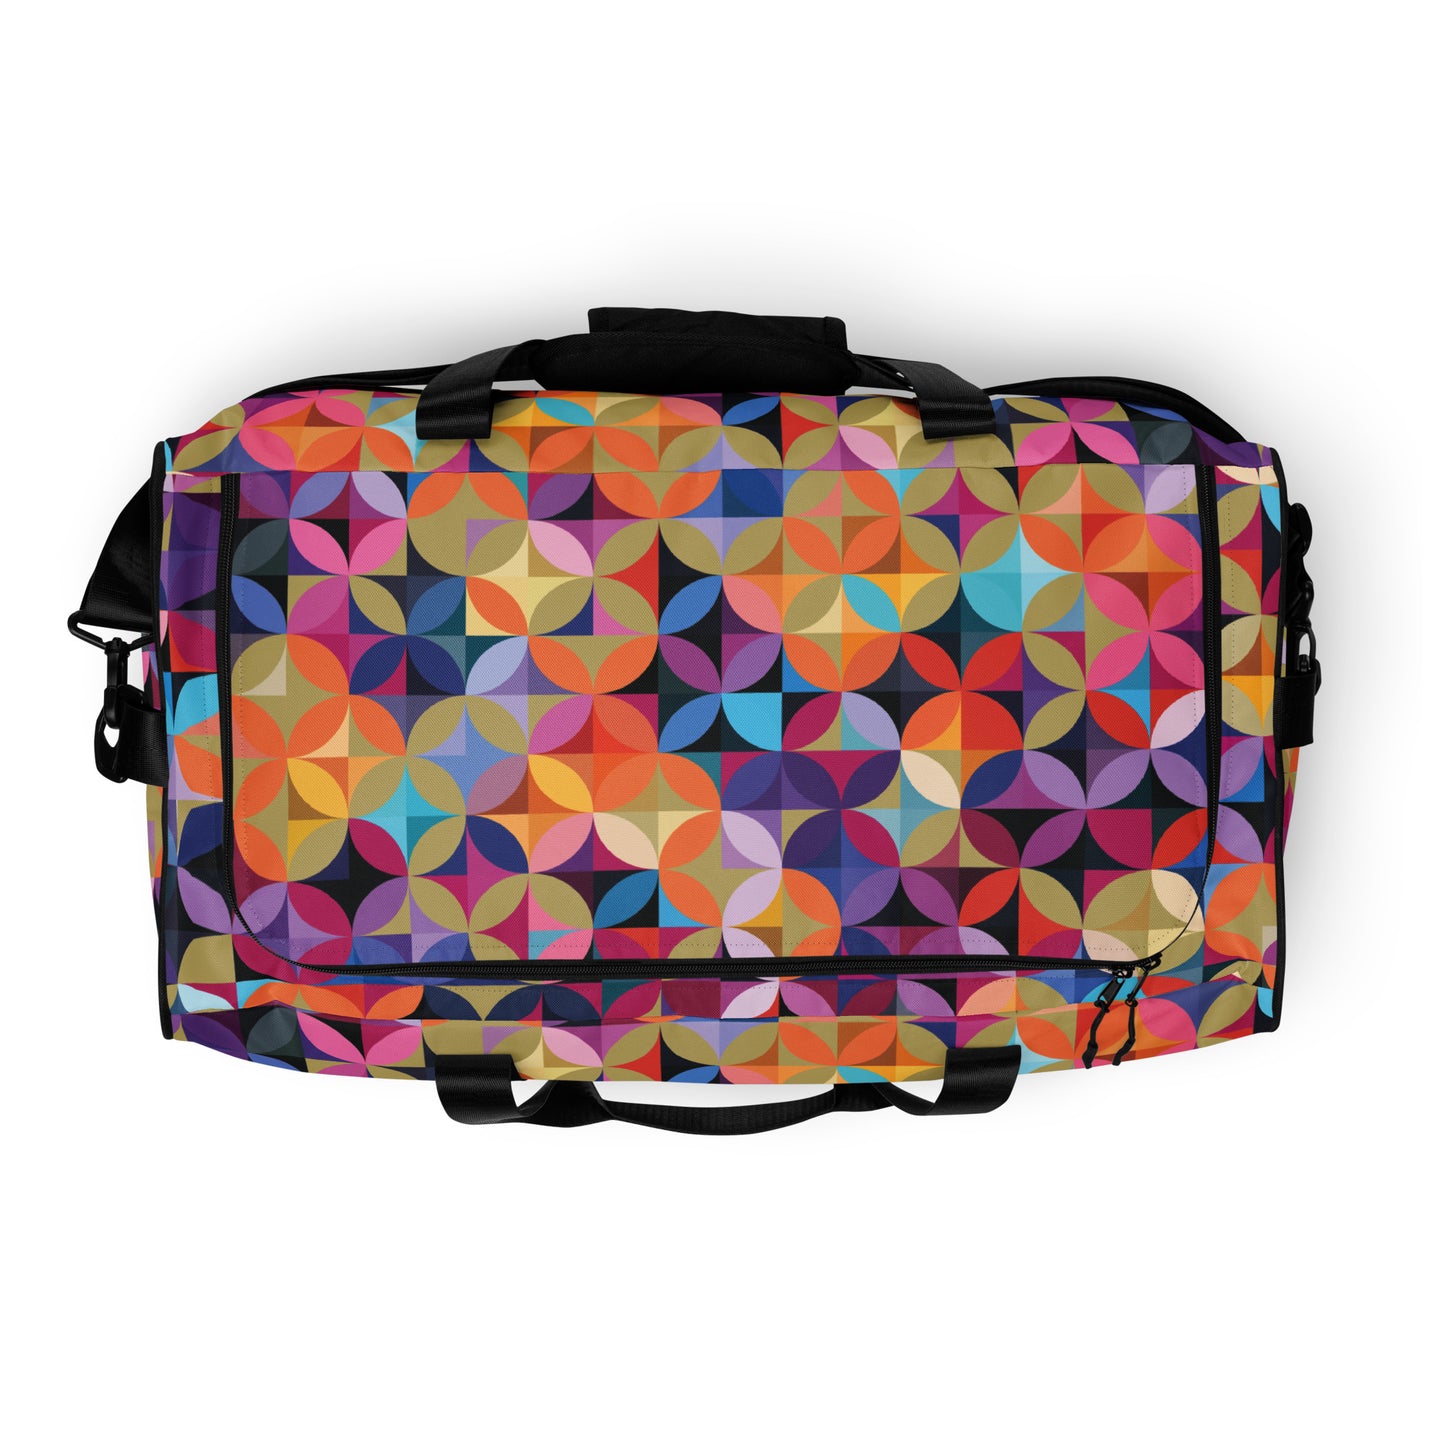 Multicolor illusions - Sustainably Made Duffle Bag